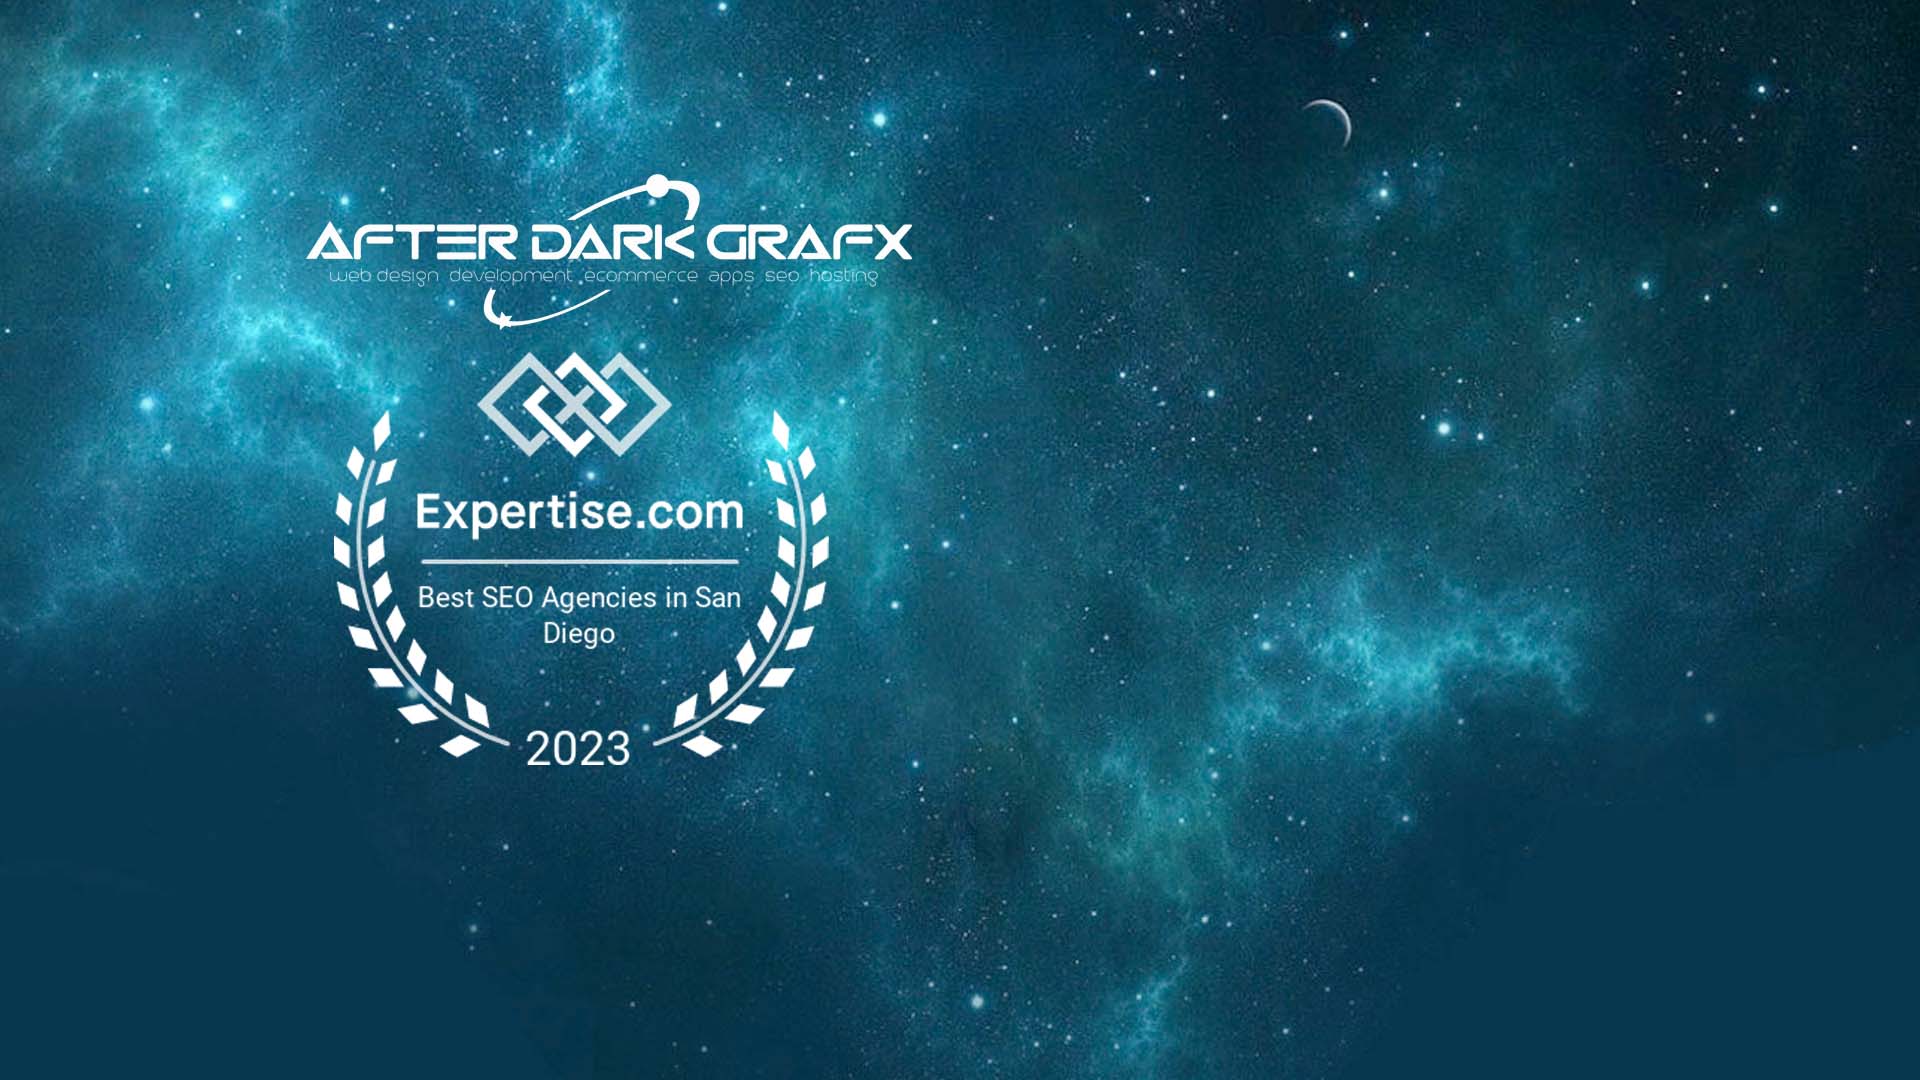 Best SEO Company for Small Businesses - Best SEO Company in the World - AfterDarkGrafx.com.